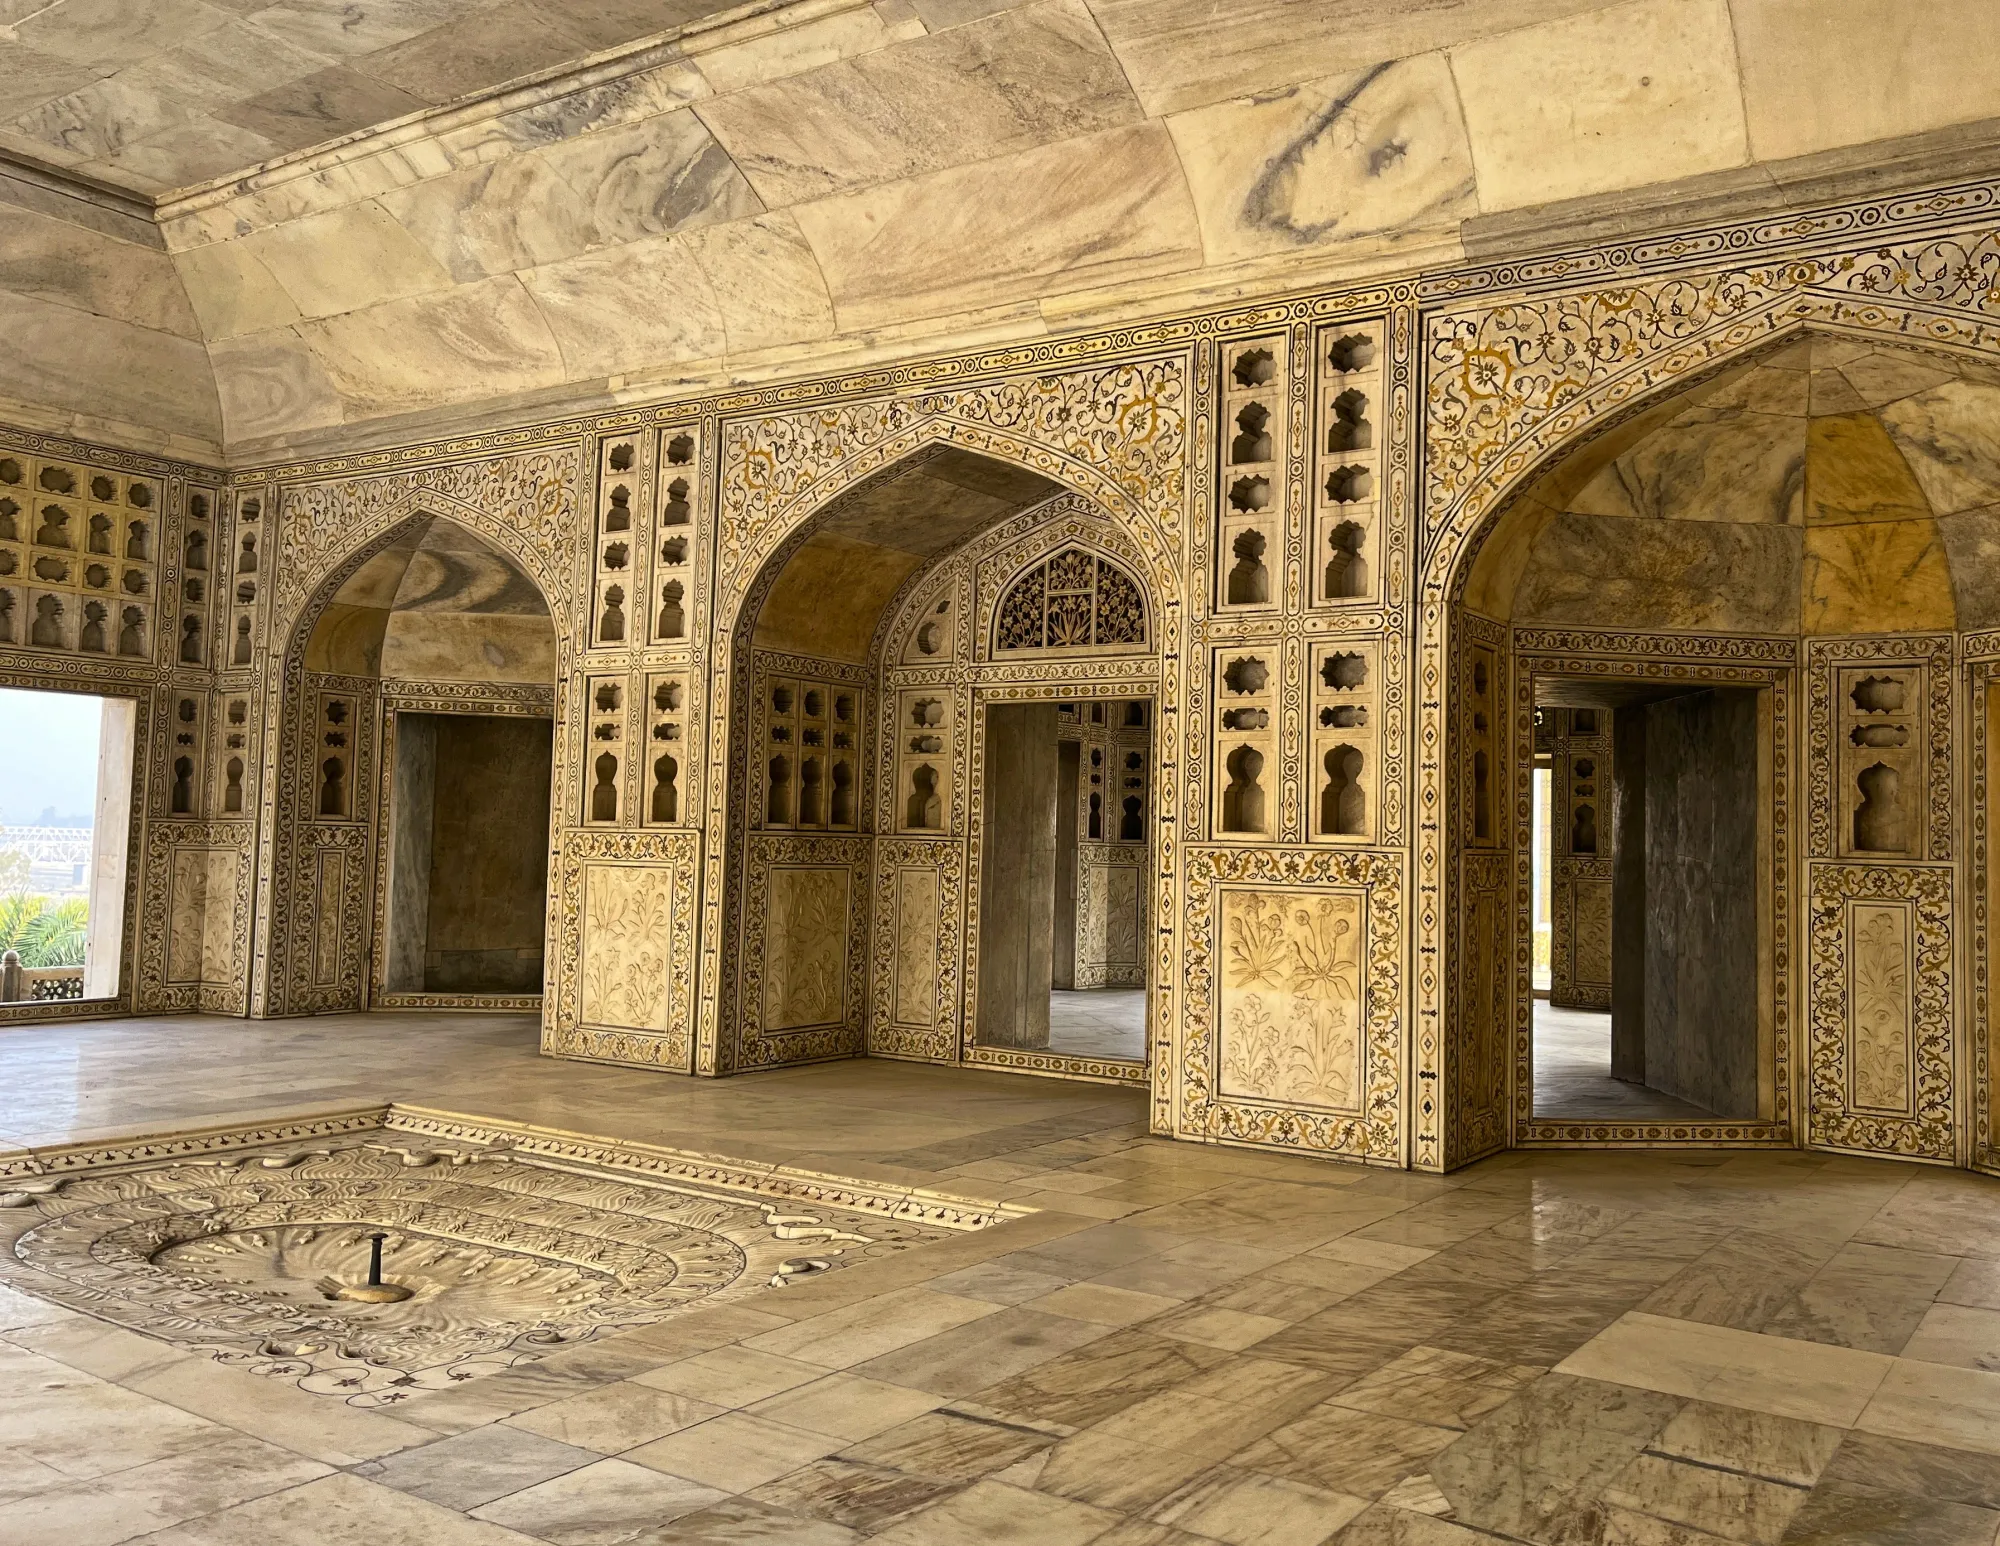 Carved mosaics with an inset on the floor